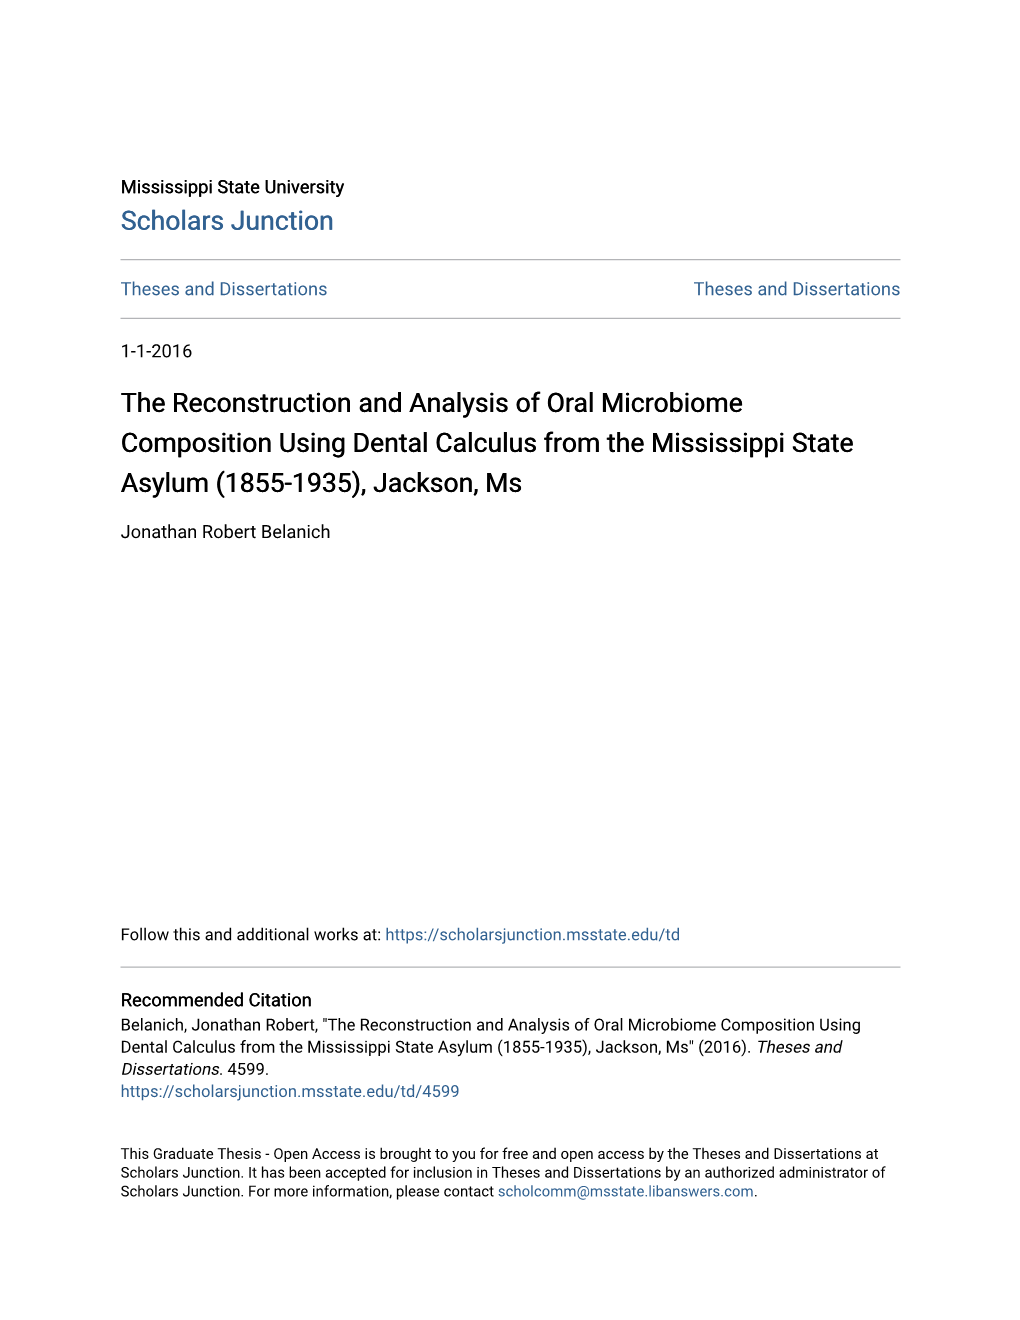 The Reconstruction and Analysis of Oral Microbiome Composition Using Dental Calculus from the Mississippi State Asylum (1855-1935), Jackson, Ms